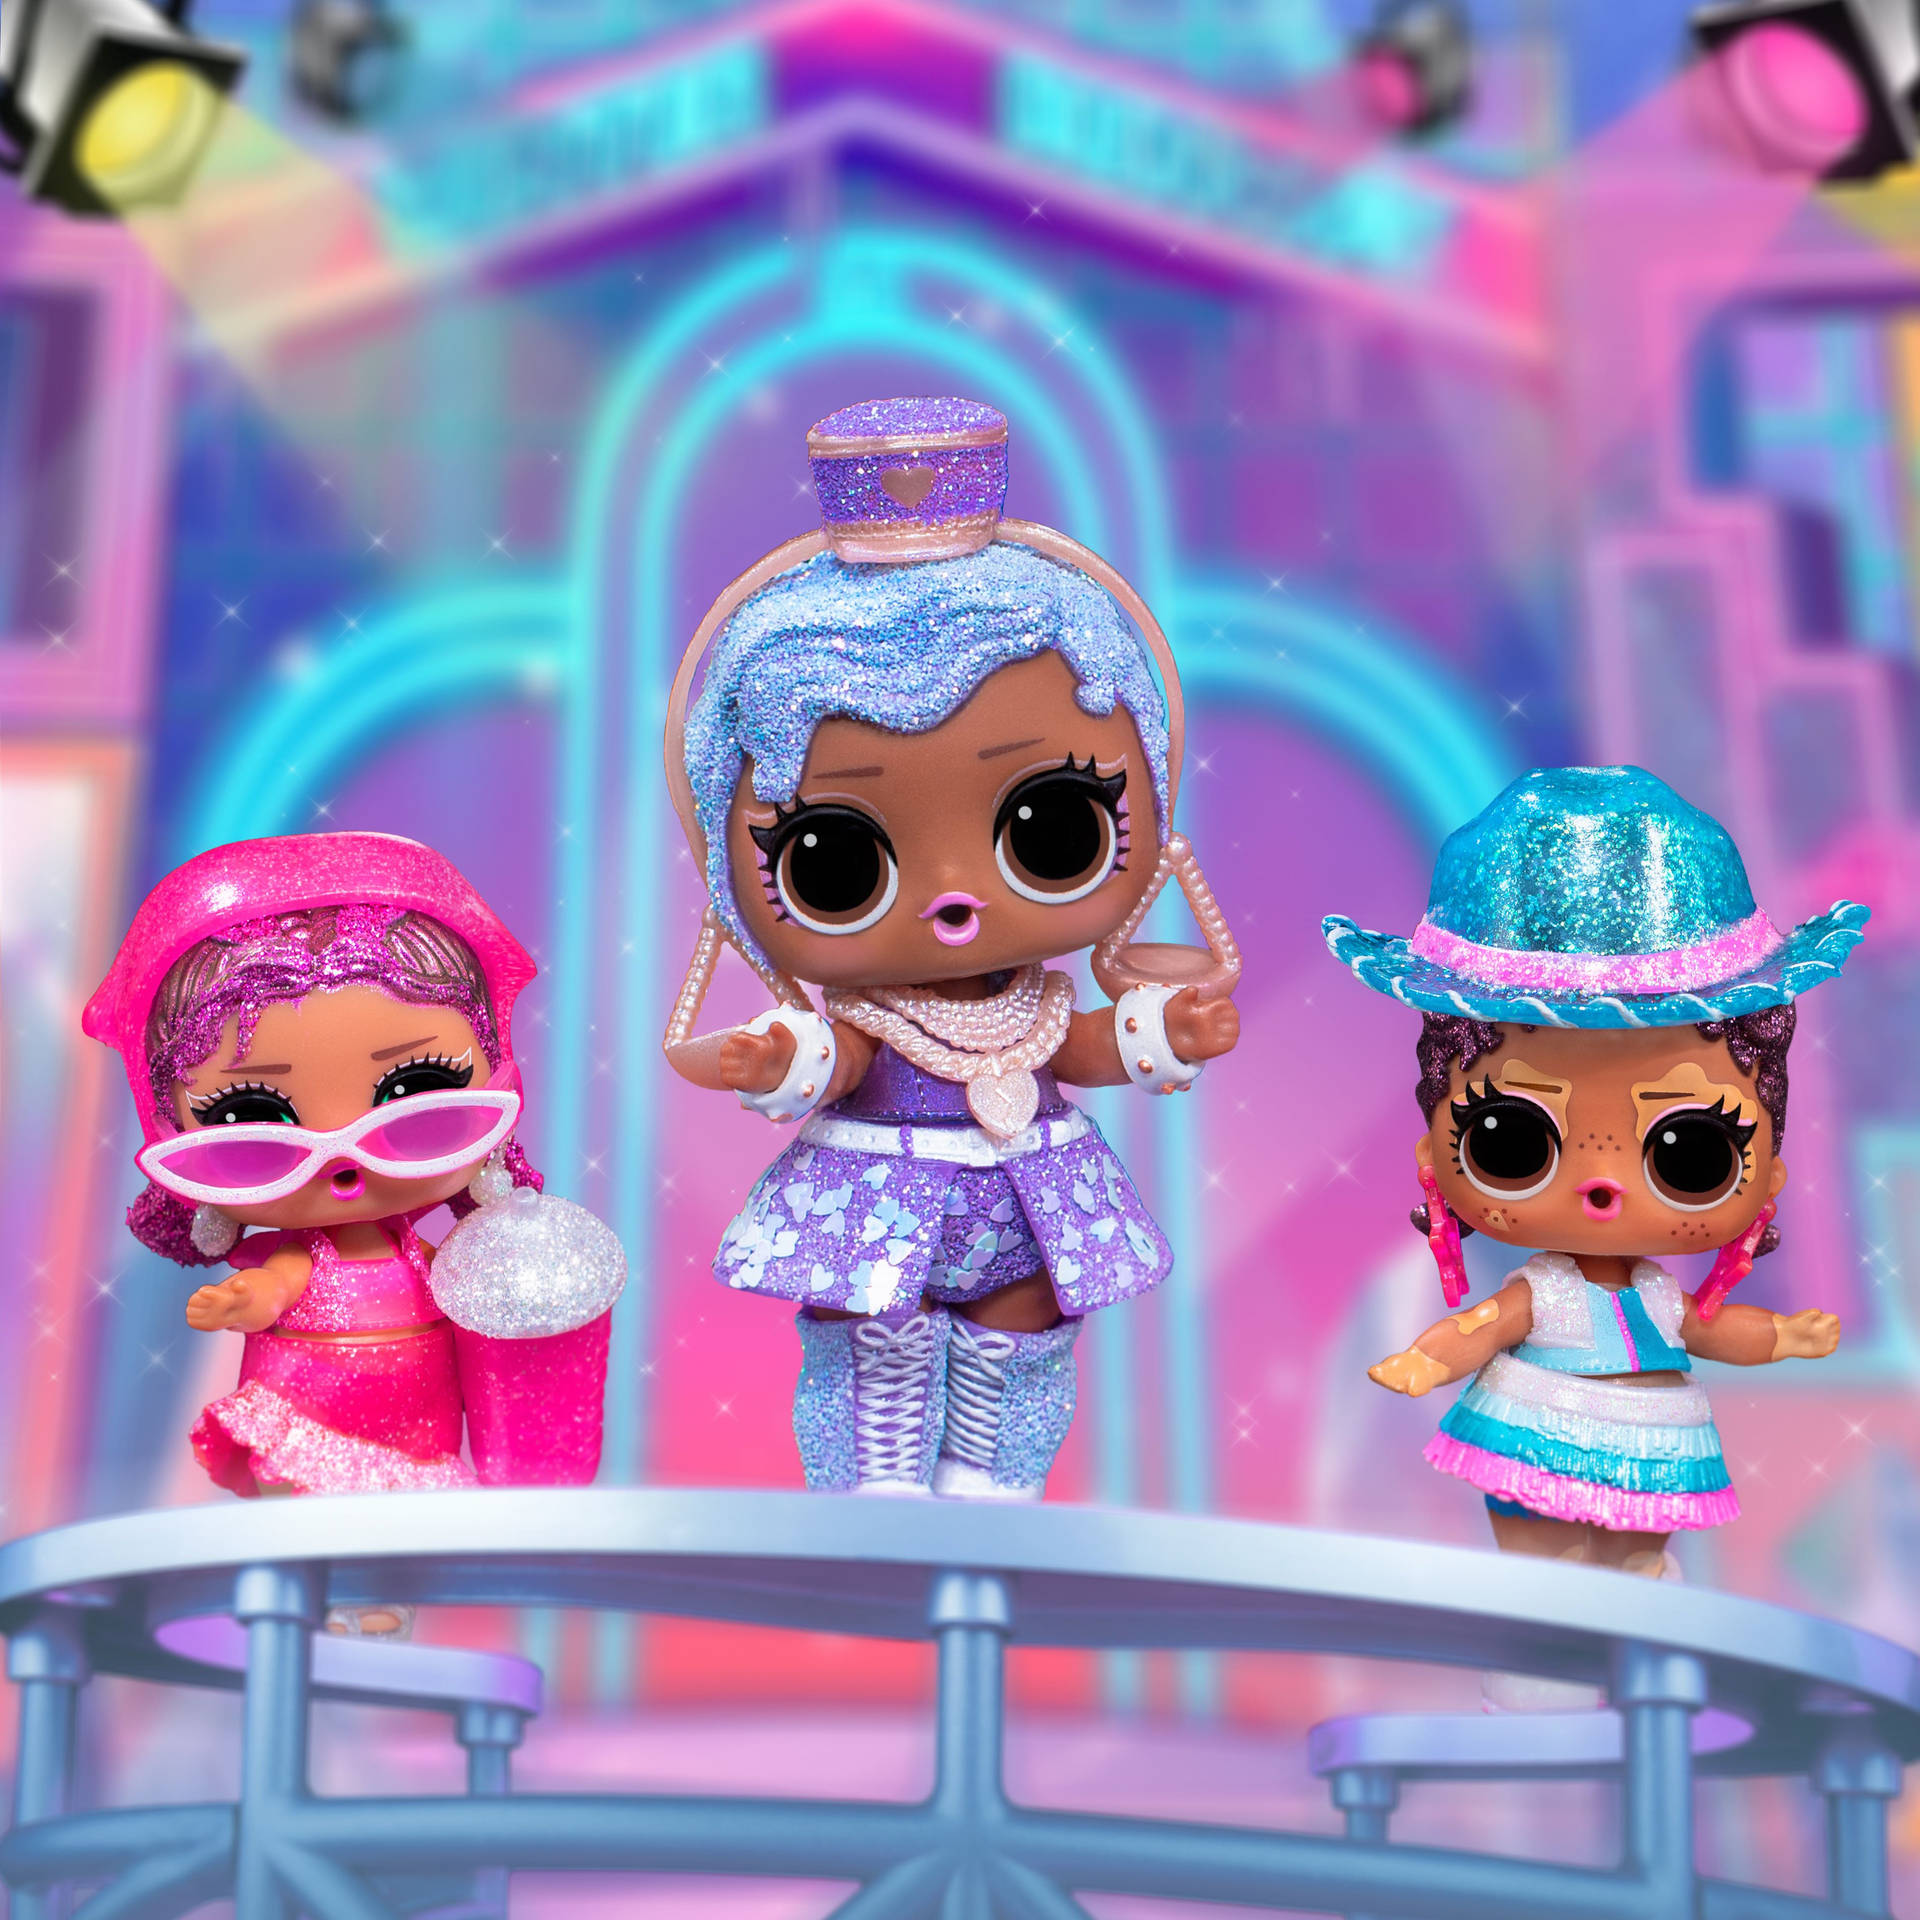 The L.o.l. Surprise Dolls Offer Endless Fun And Surprise! Background